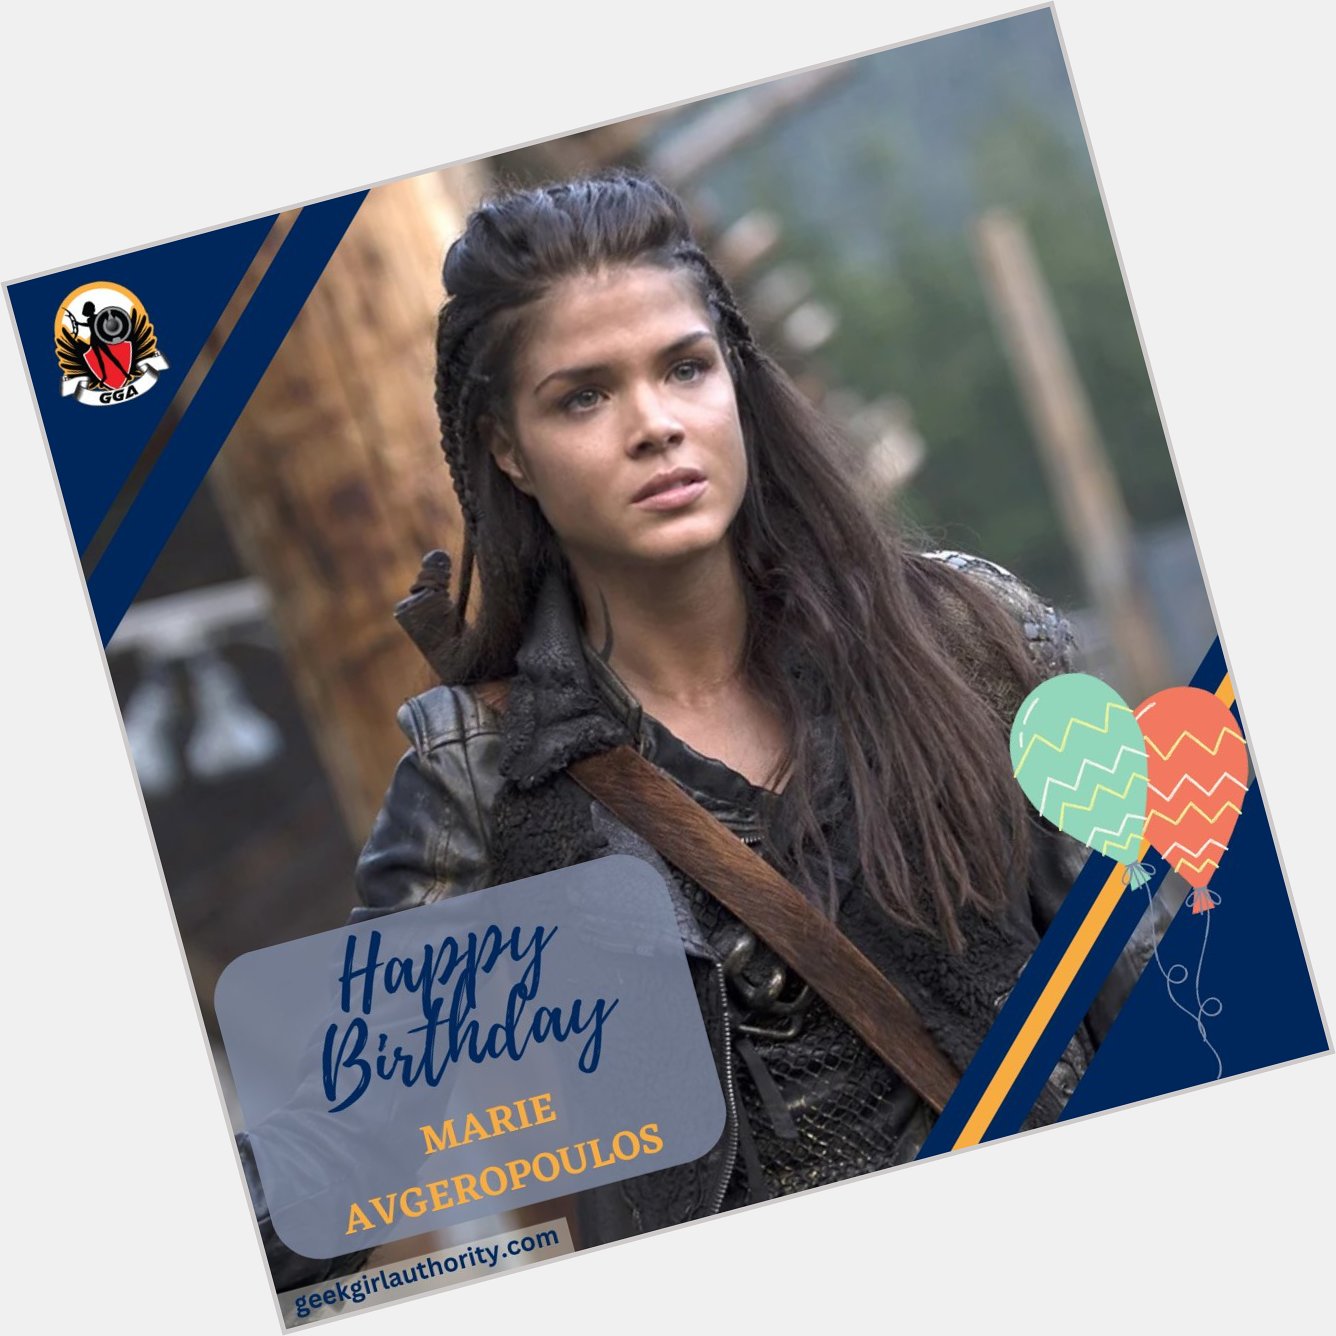 Happy Birthday, Marie Avgeropoulos!  Which one of her roles is your favorite?  